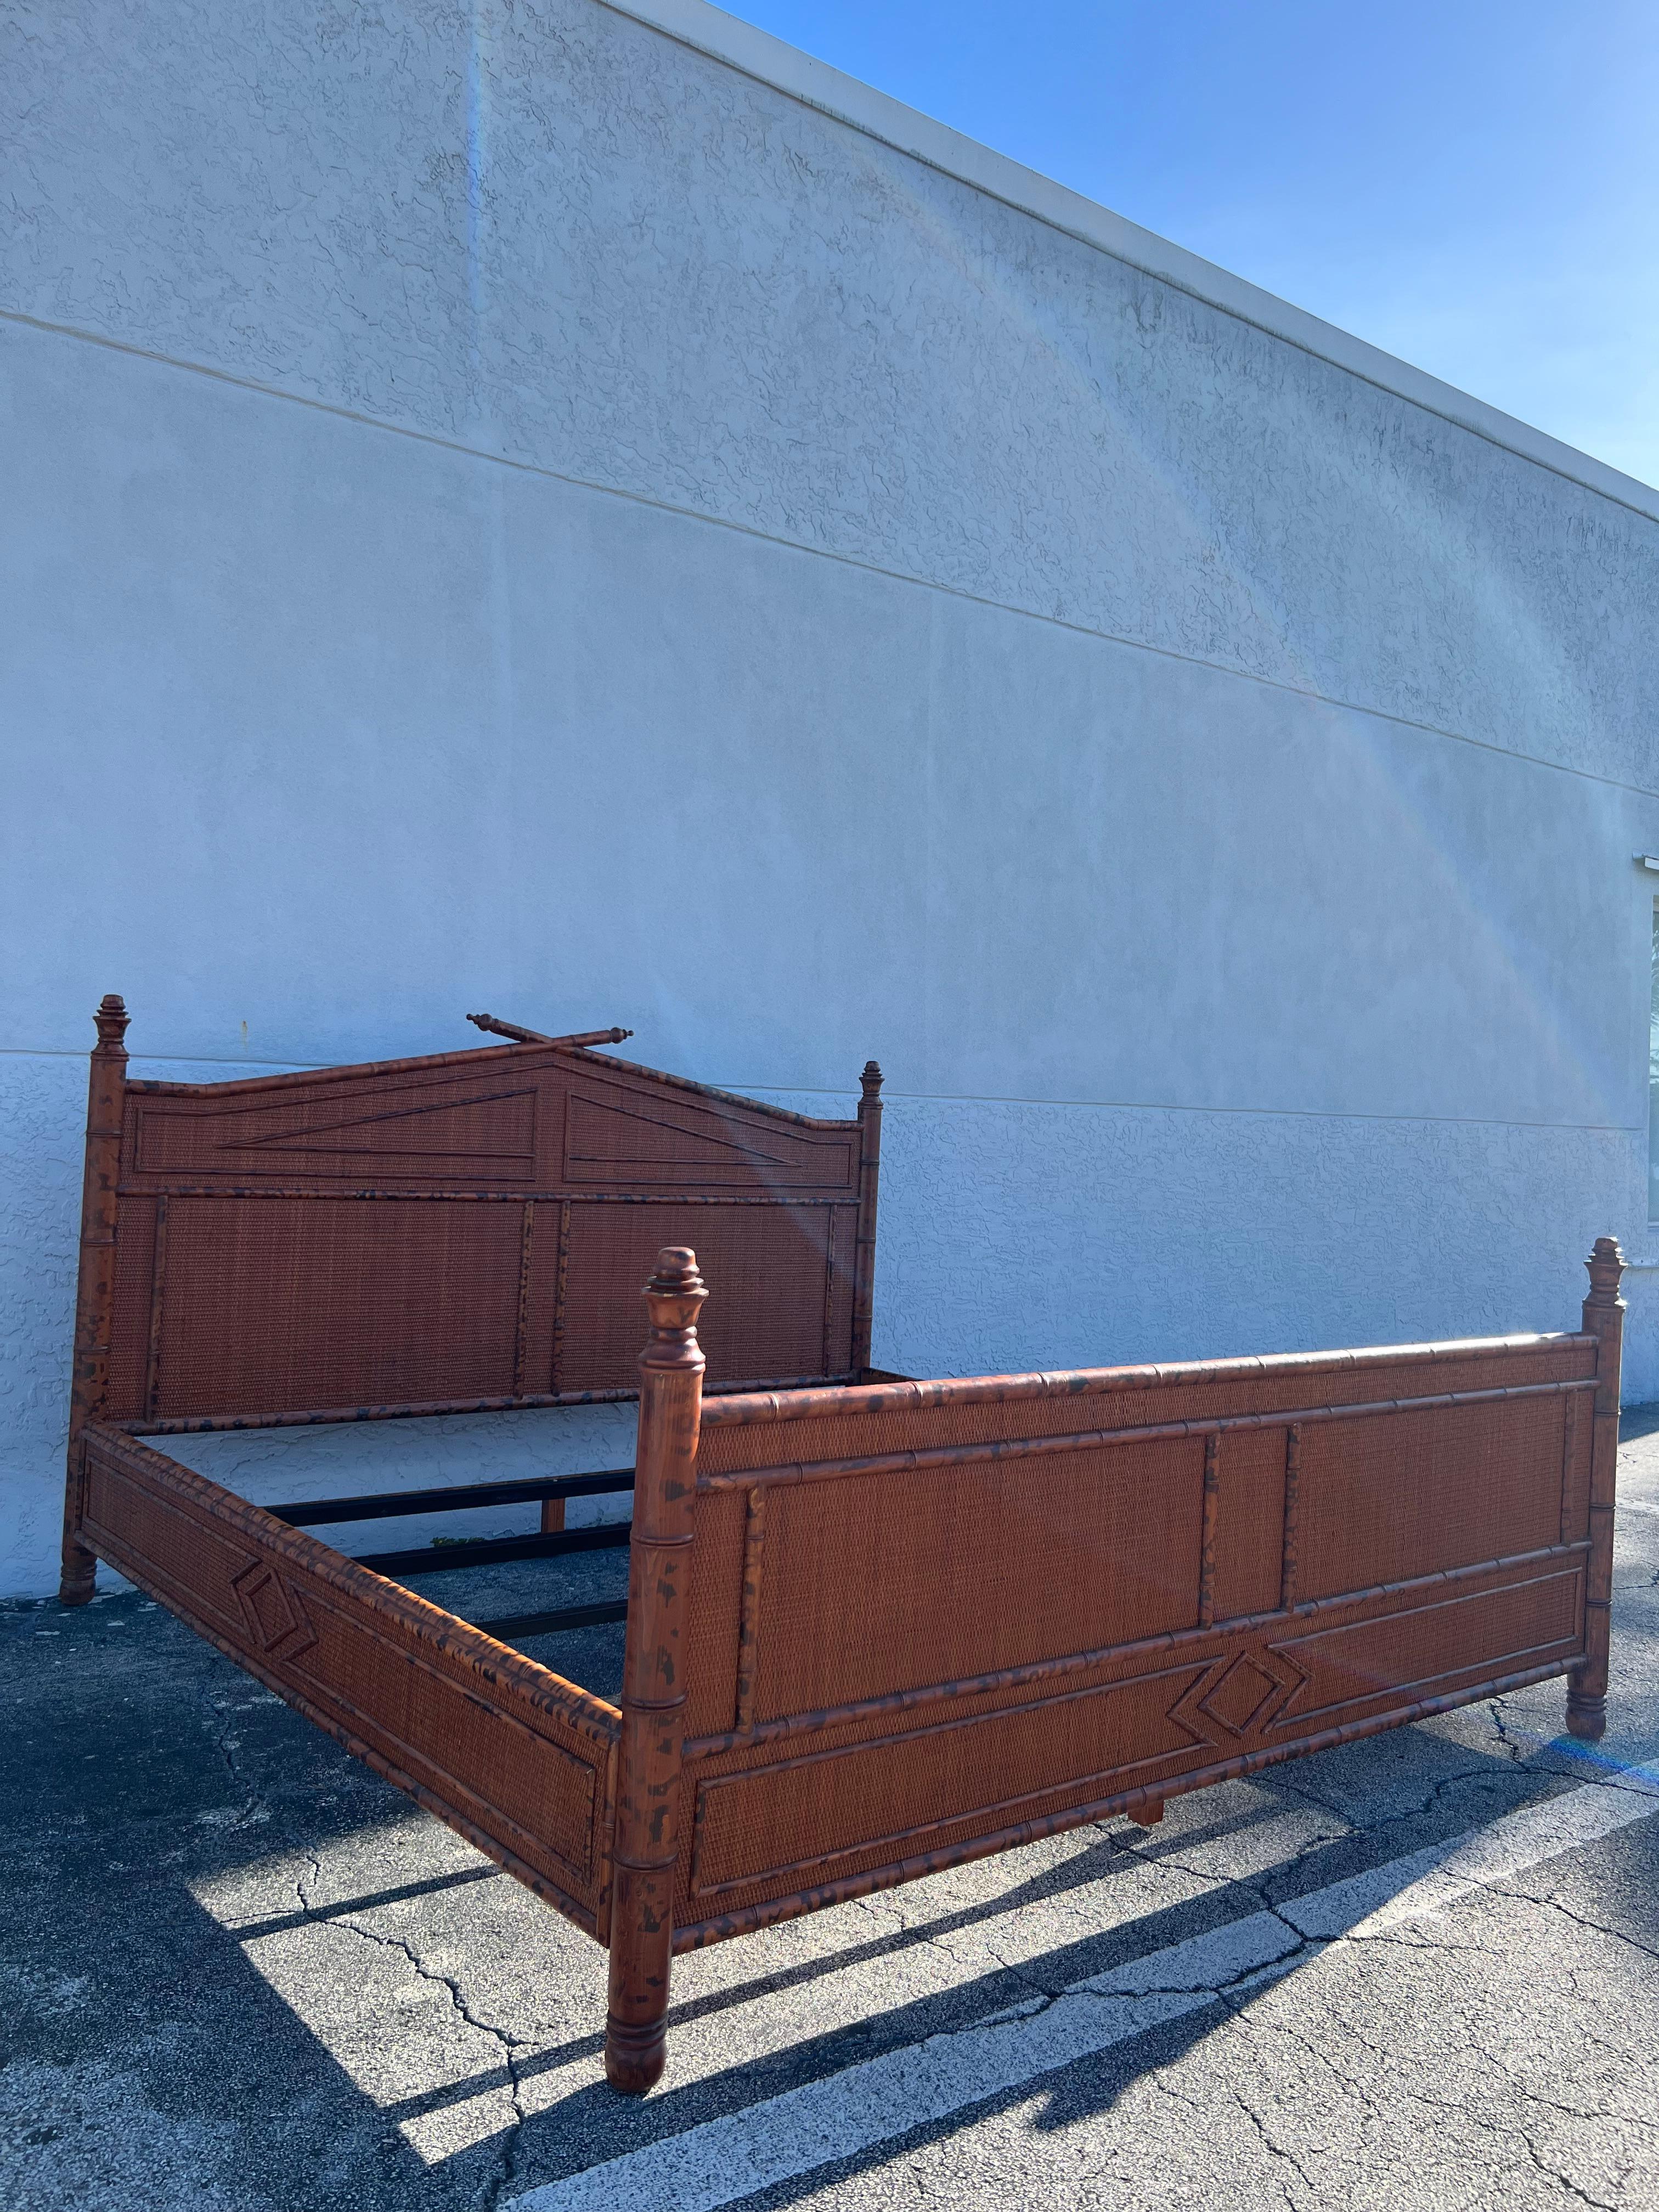 British colonial style burnt bamboo and cane king size bed frame. Signed Bloomingdales. Wear to finish of cane and bamboo (please refer to photos). Additional photos available upon request.

Would work well in a variety of interiors such as modern,